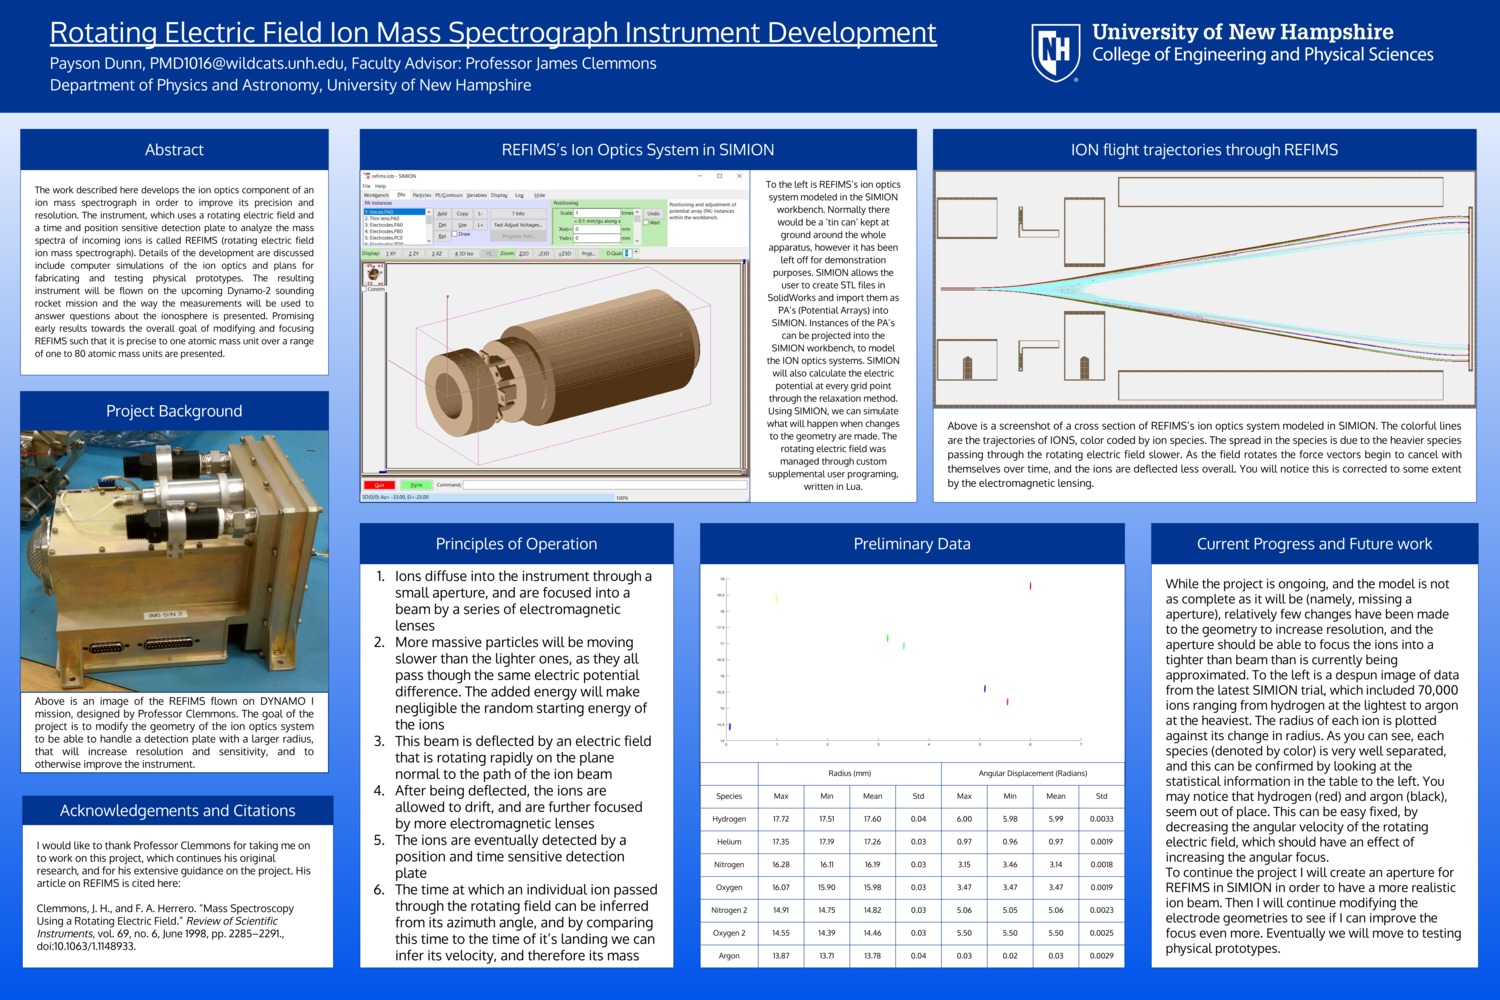 Rotating Electric Field Ion Mass Spectrograph Instrument Development by PMD1016